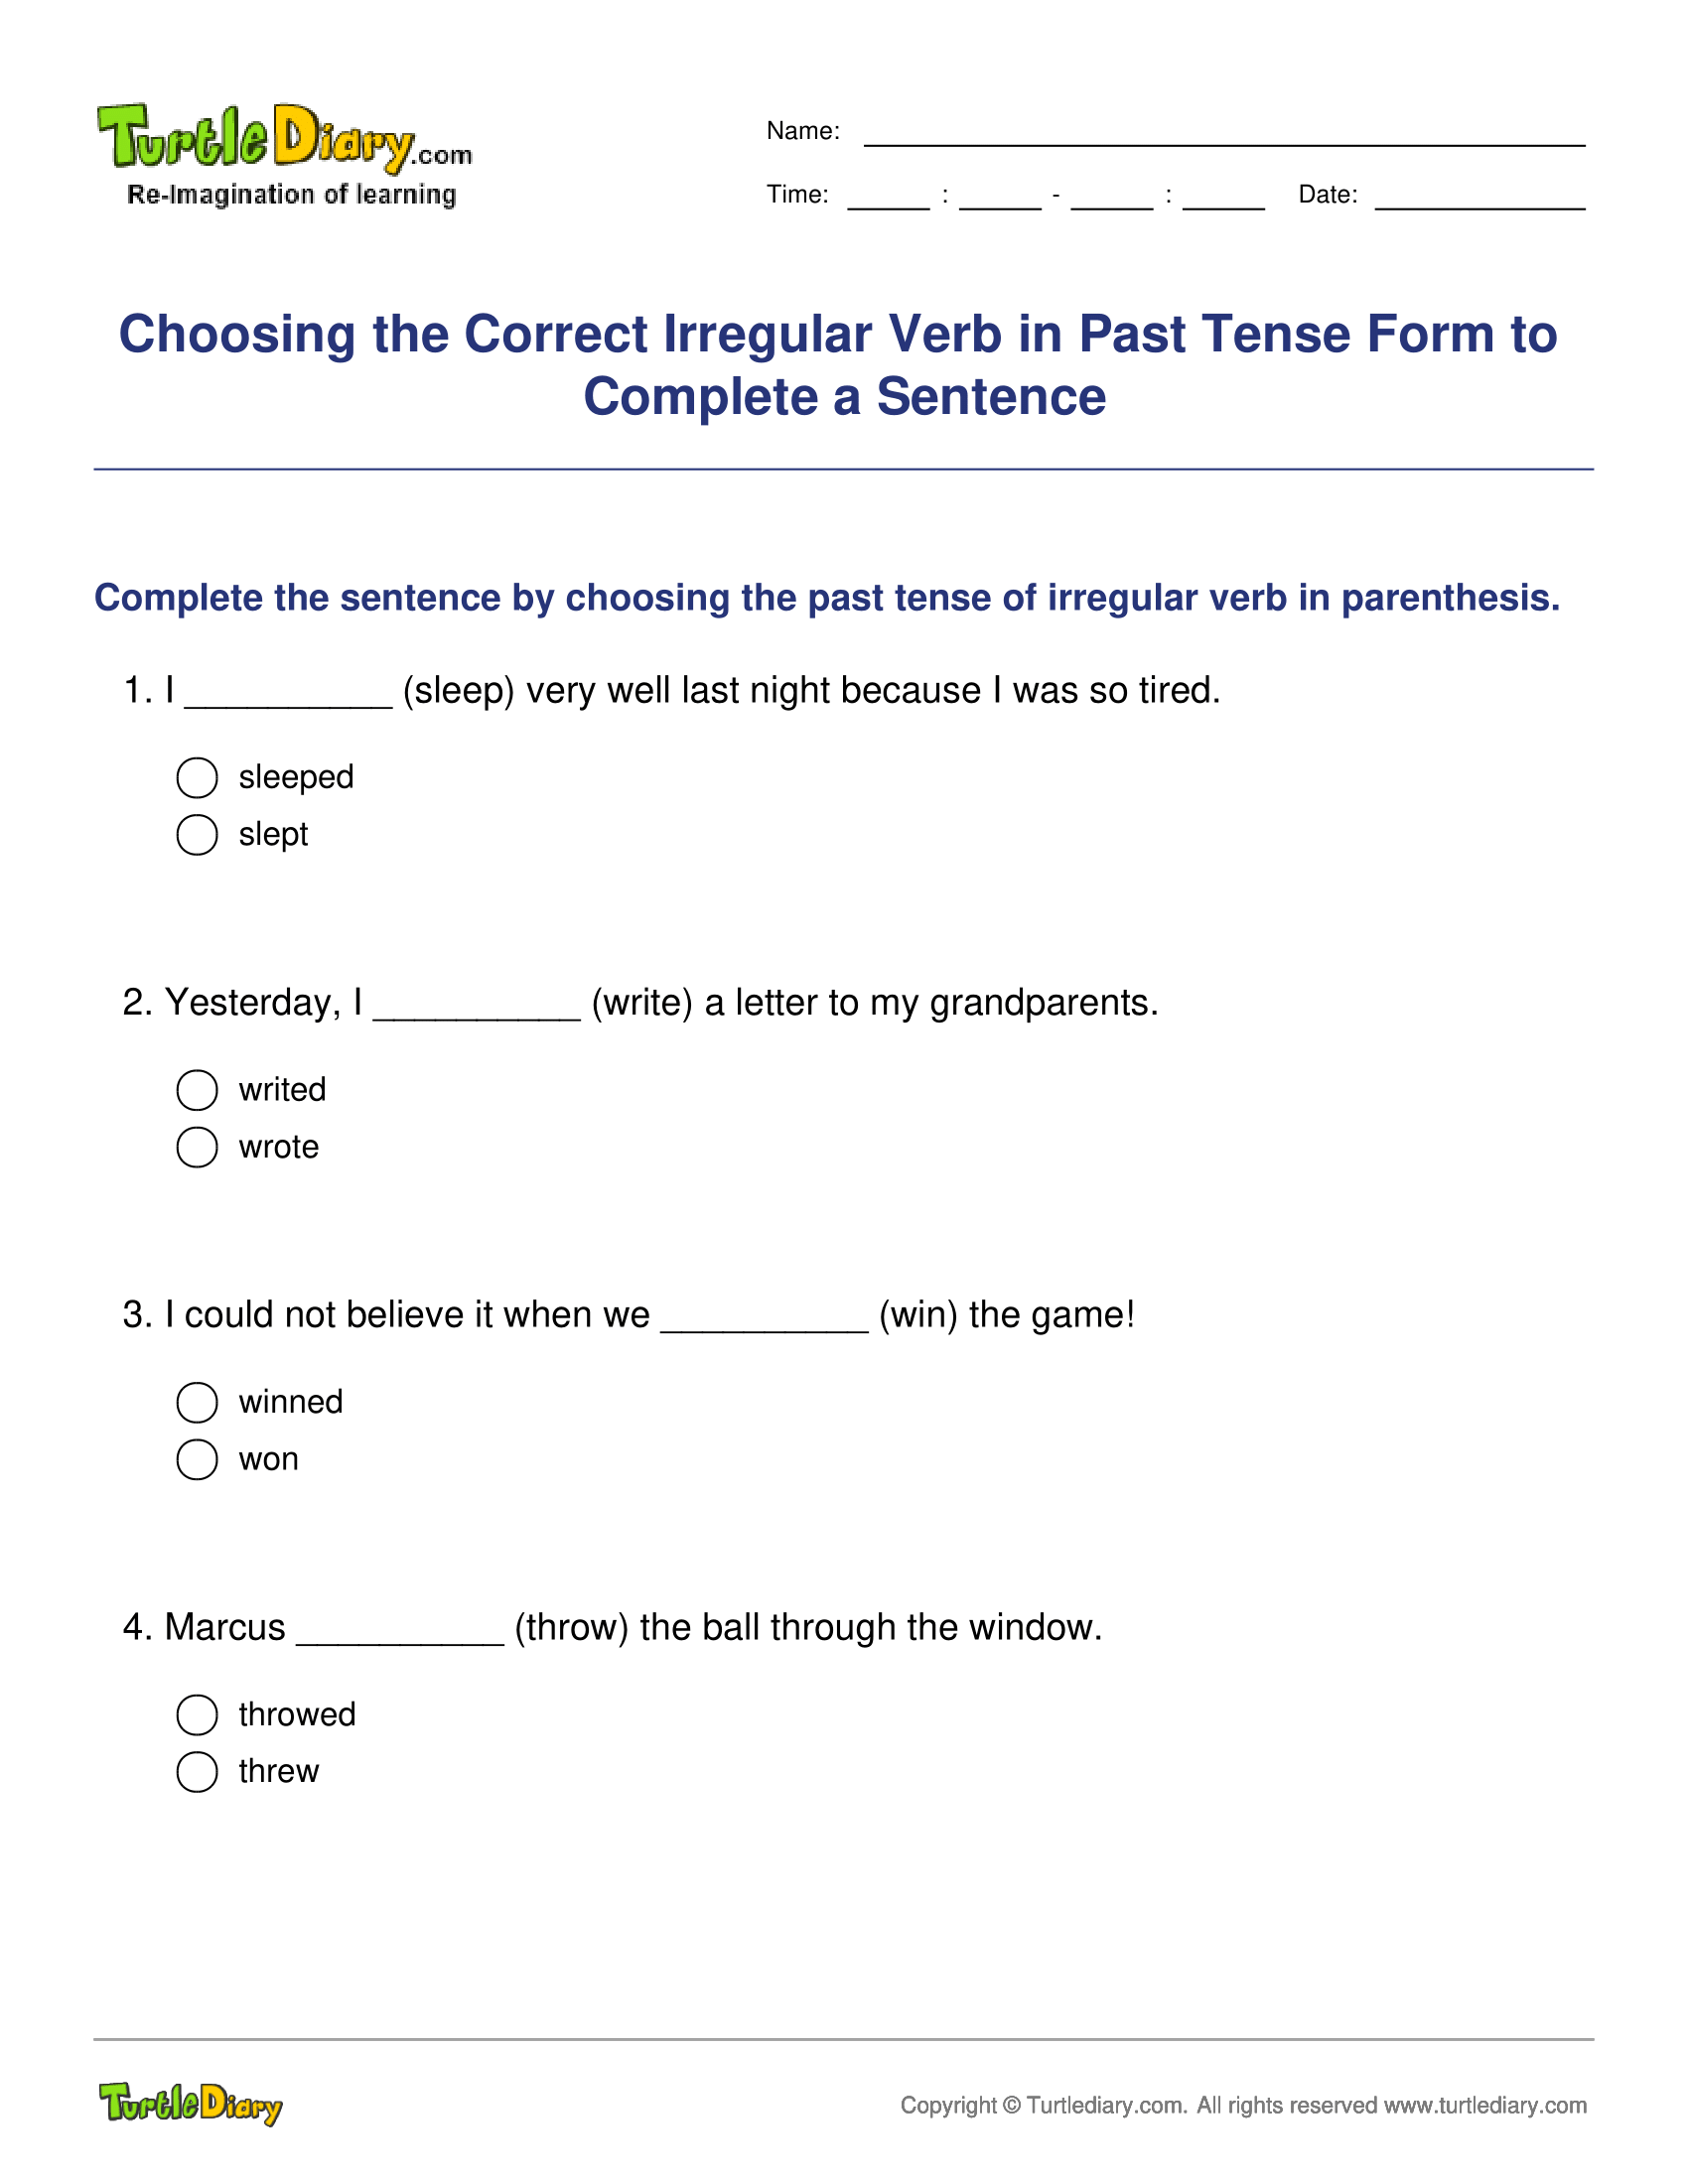 Choosing the Correct Irregular Verb in Past Tense Form to Complete a Sentence